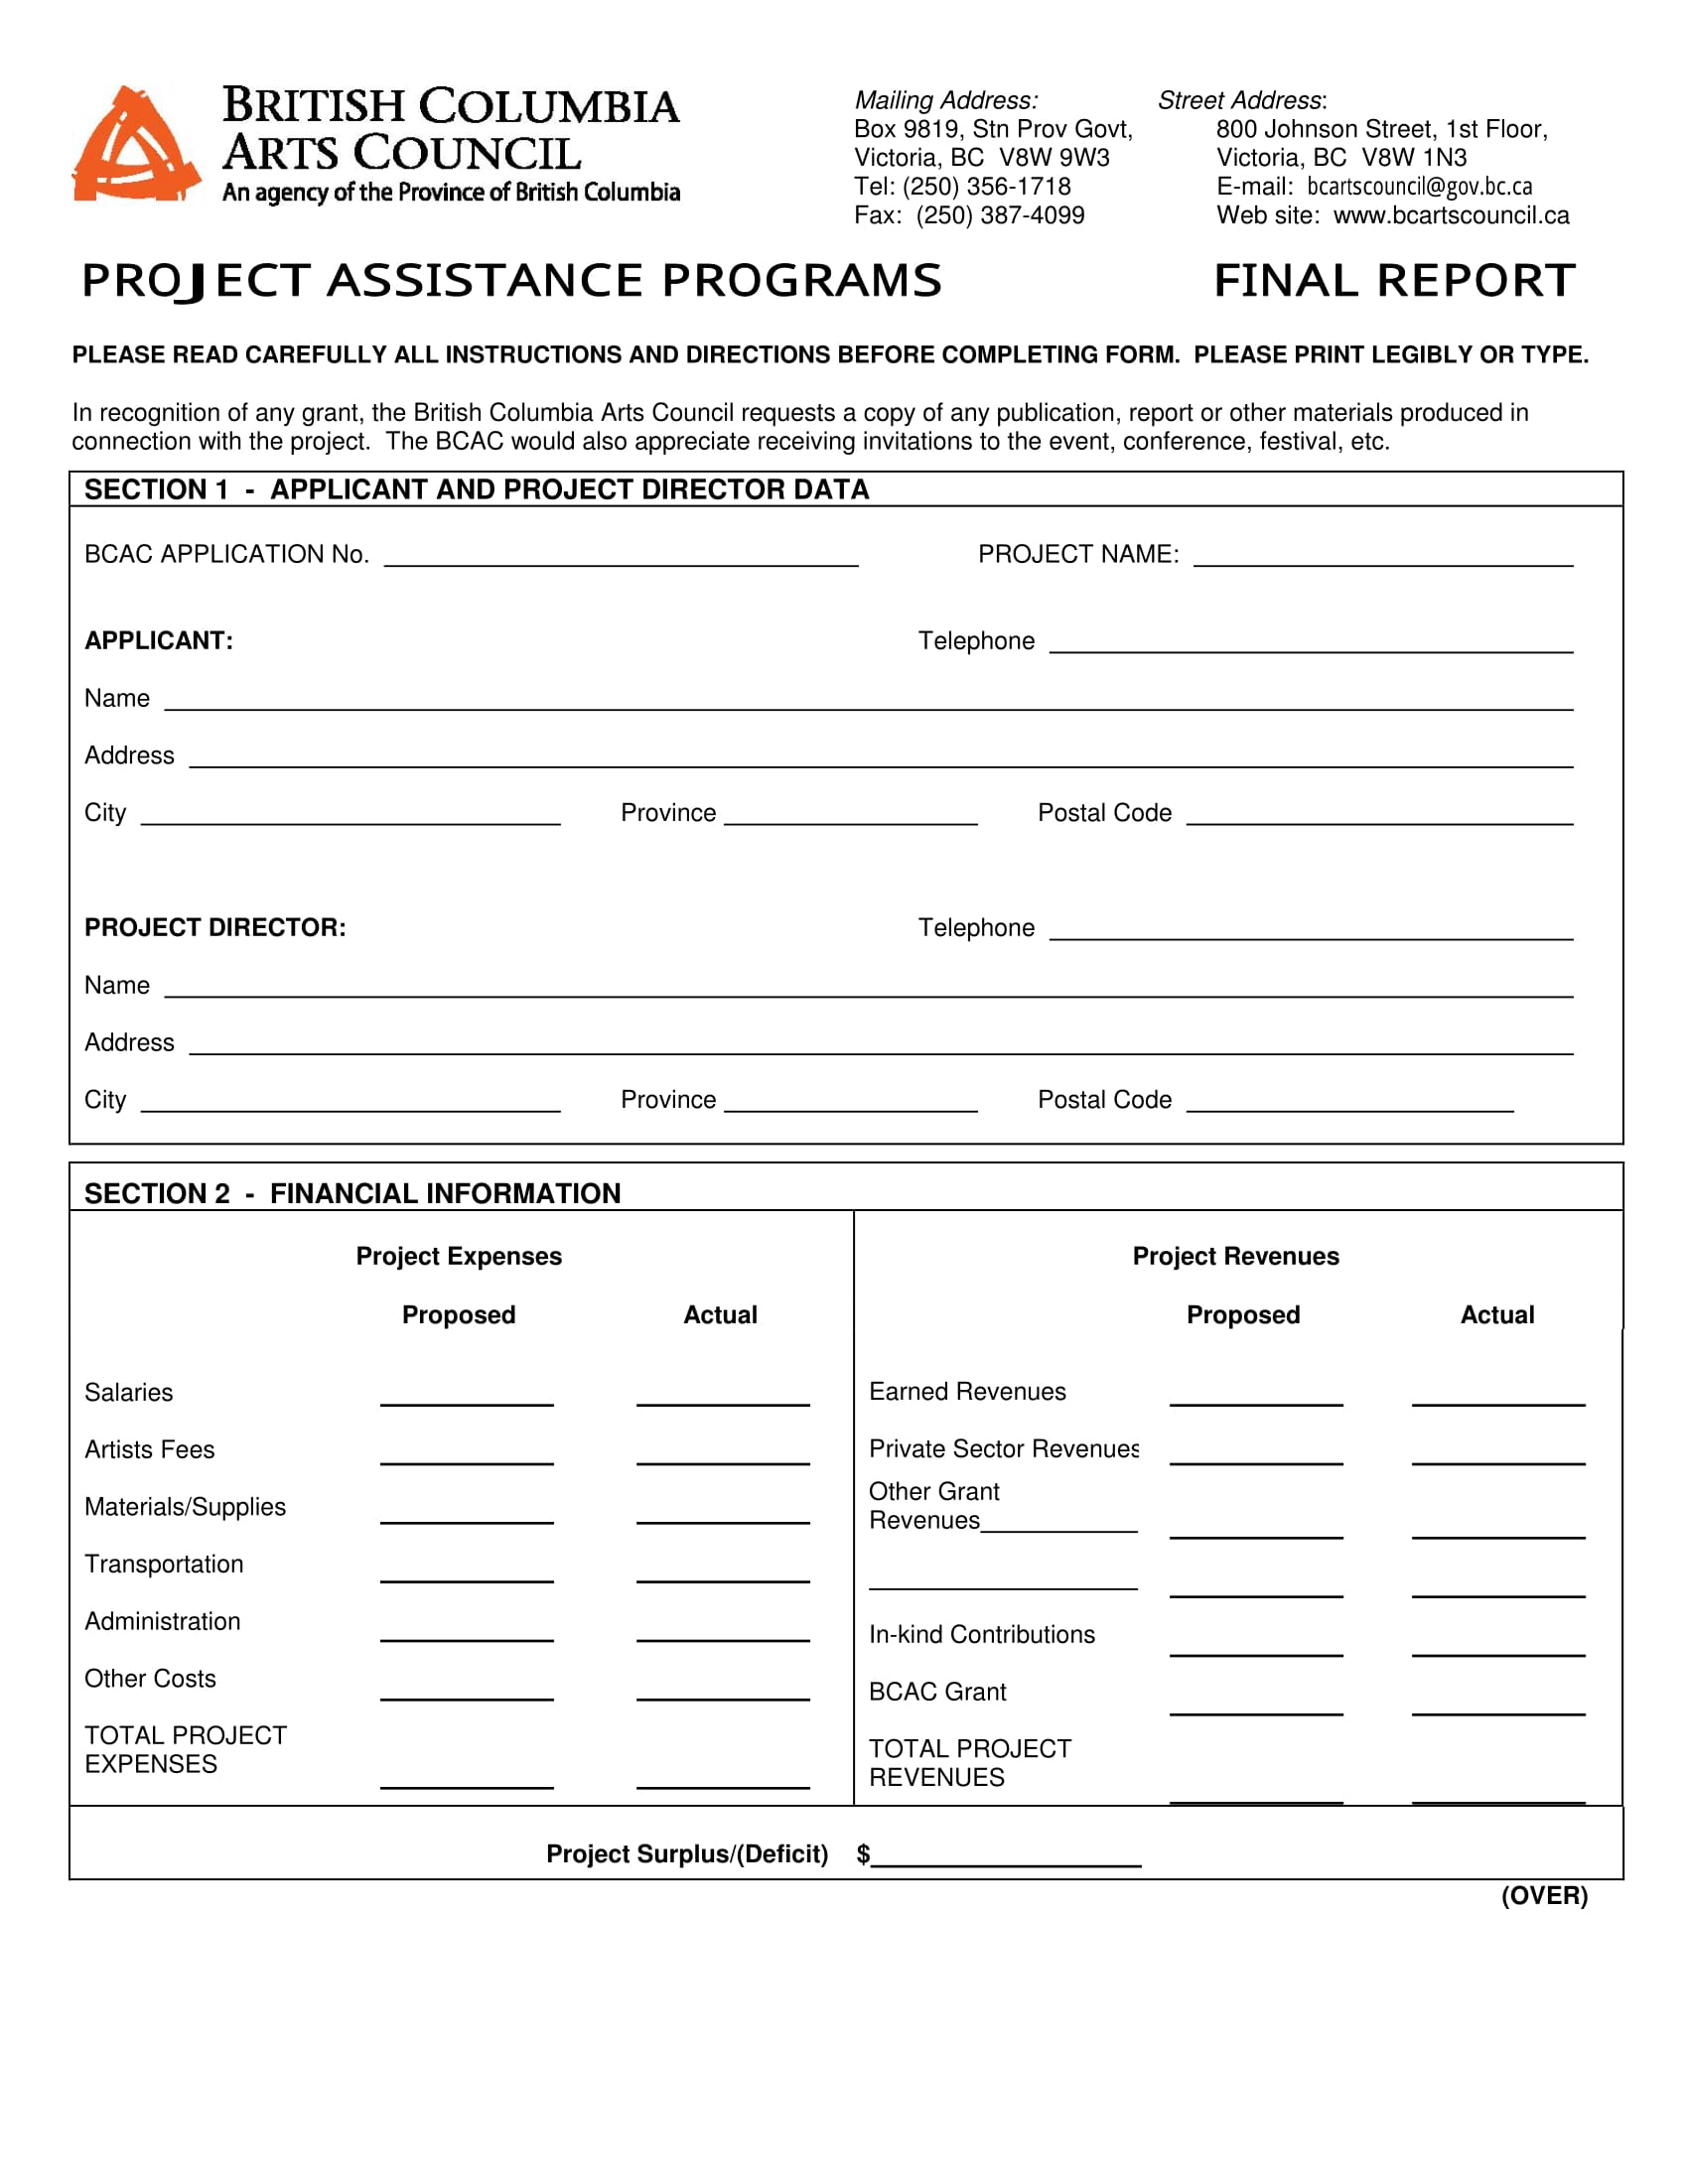 final report for project assistance program 1